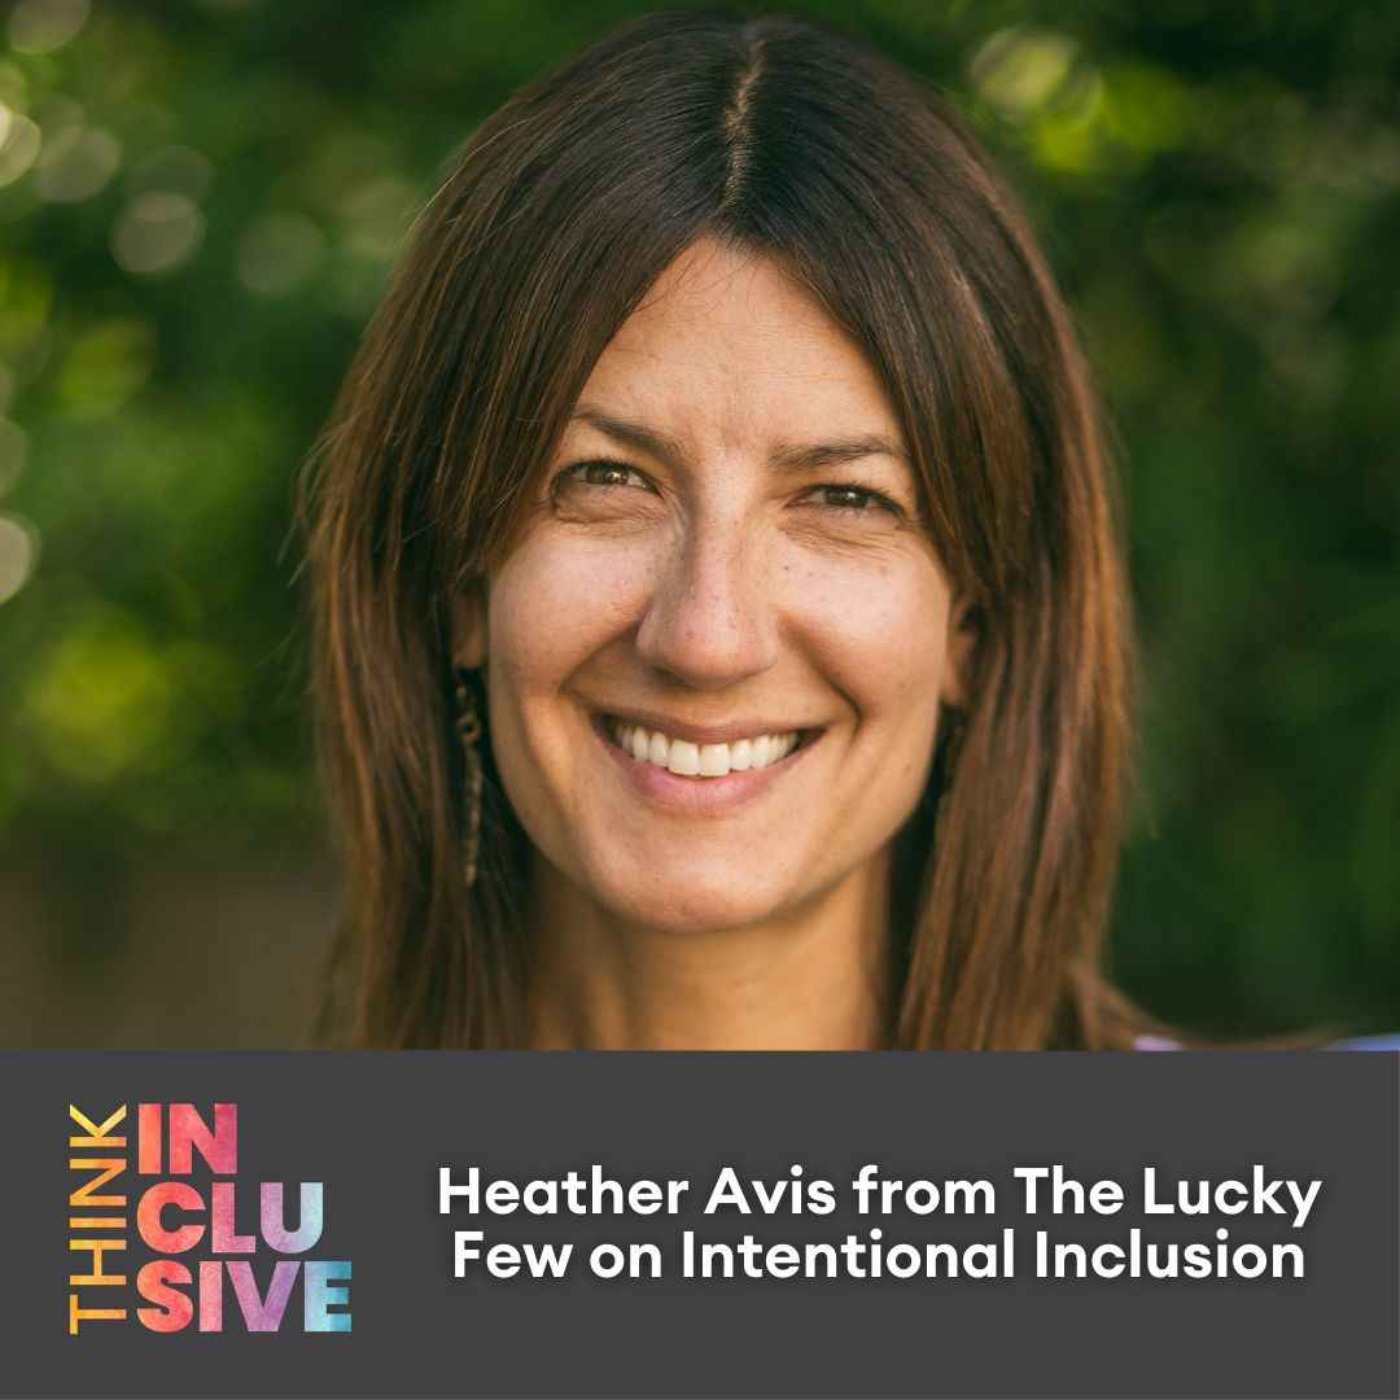 Heather Avis from The Lucky Few on Intentional Inclusion